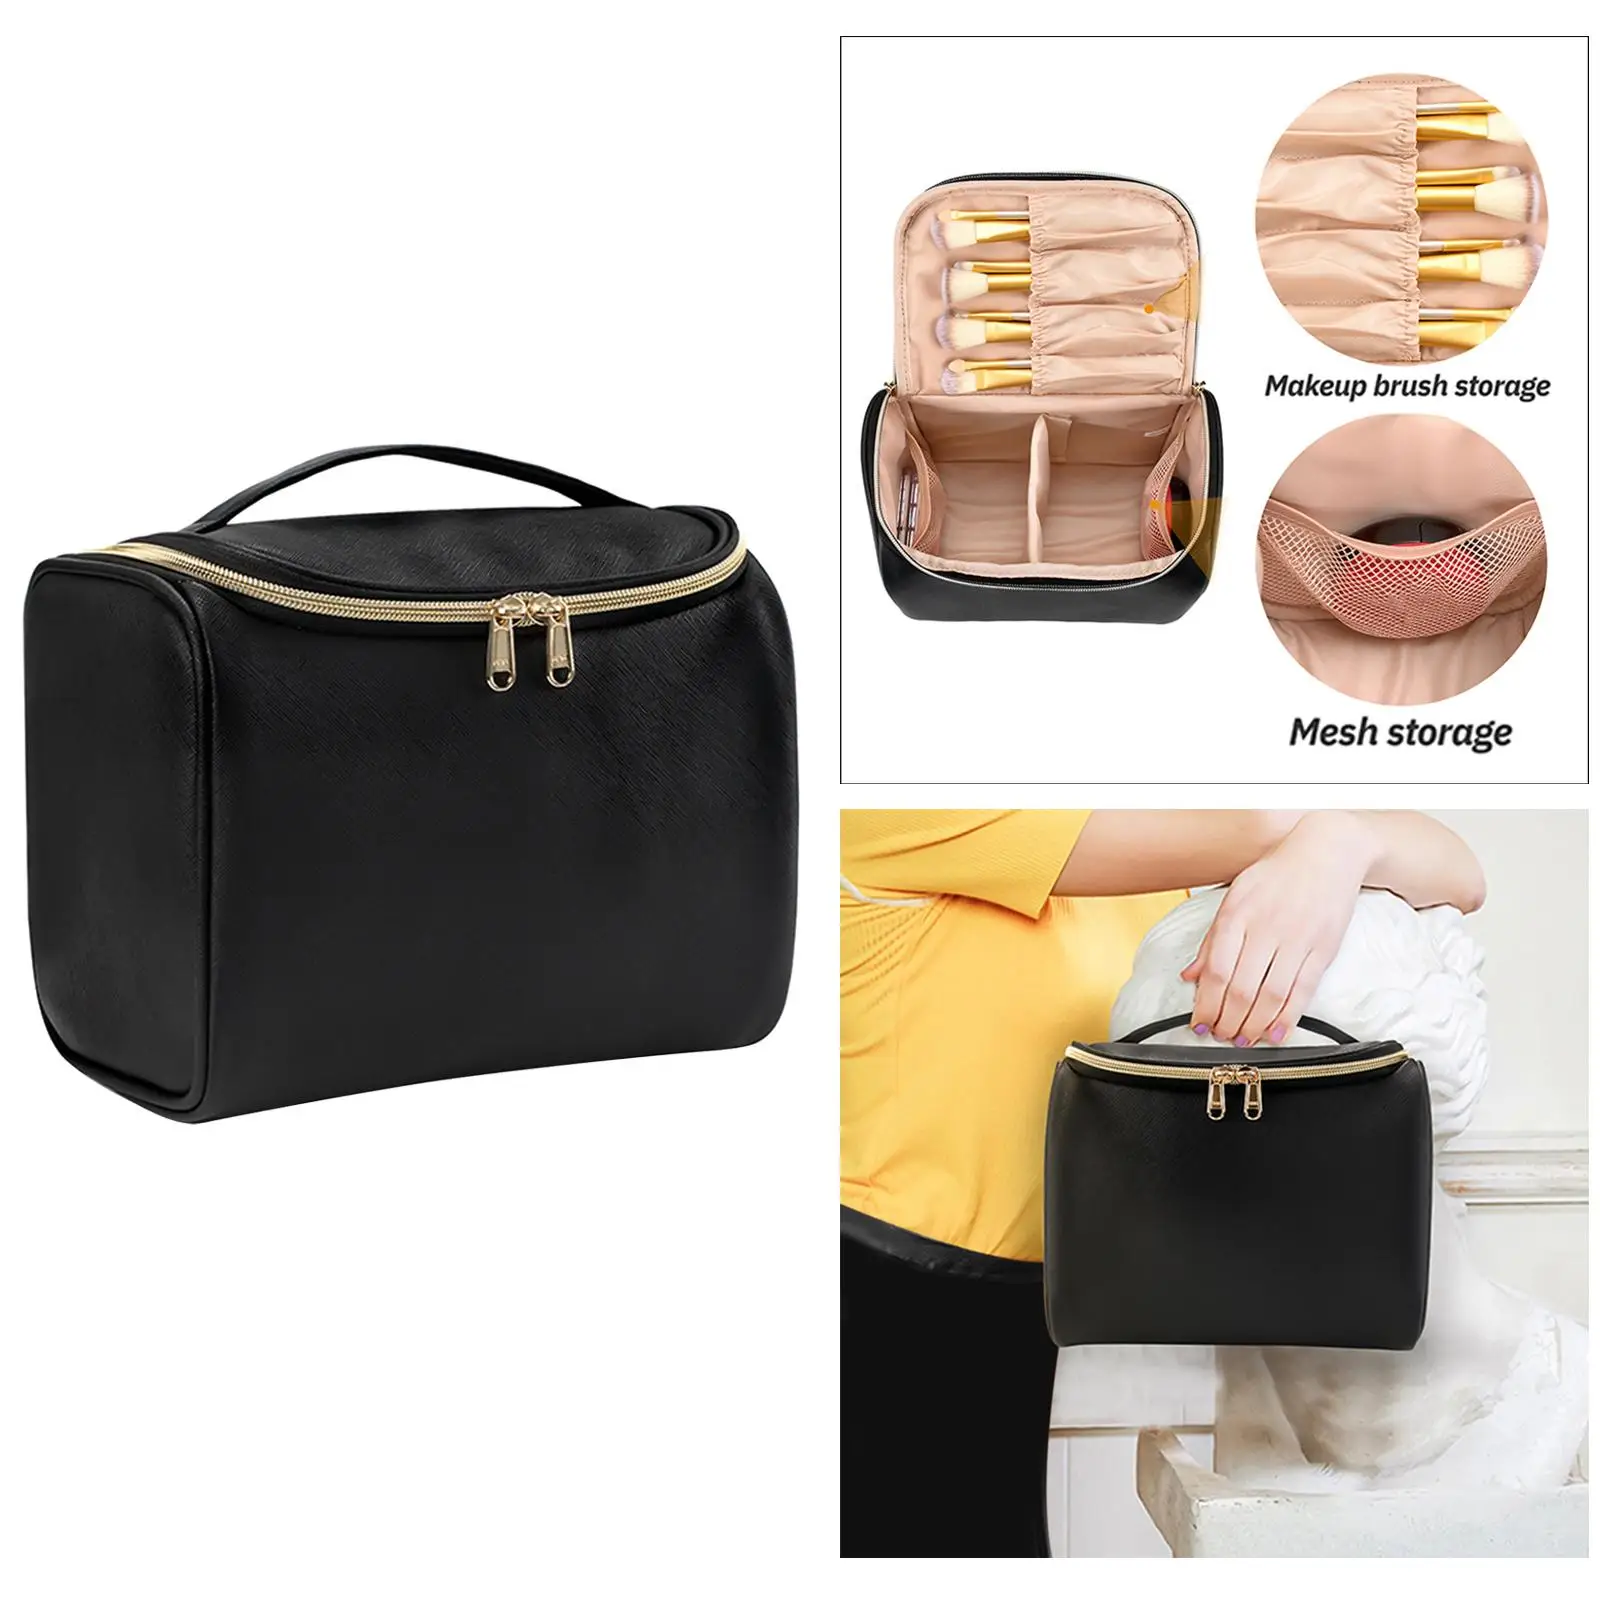 Travel Makeup Bag Case  Carry for Toiletries Accessories 23x16x19cm ,Made of Quality Waterproof PU Leather